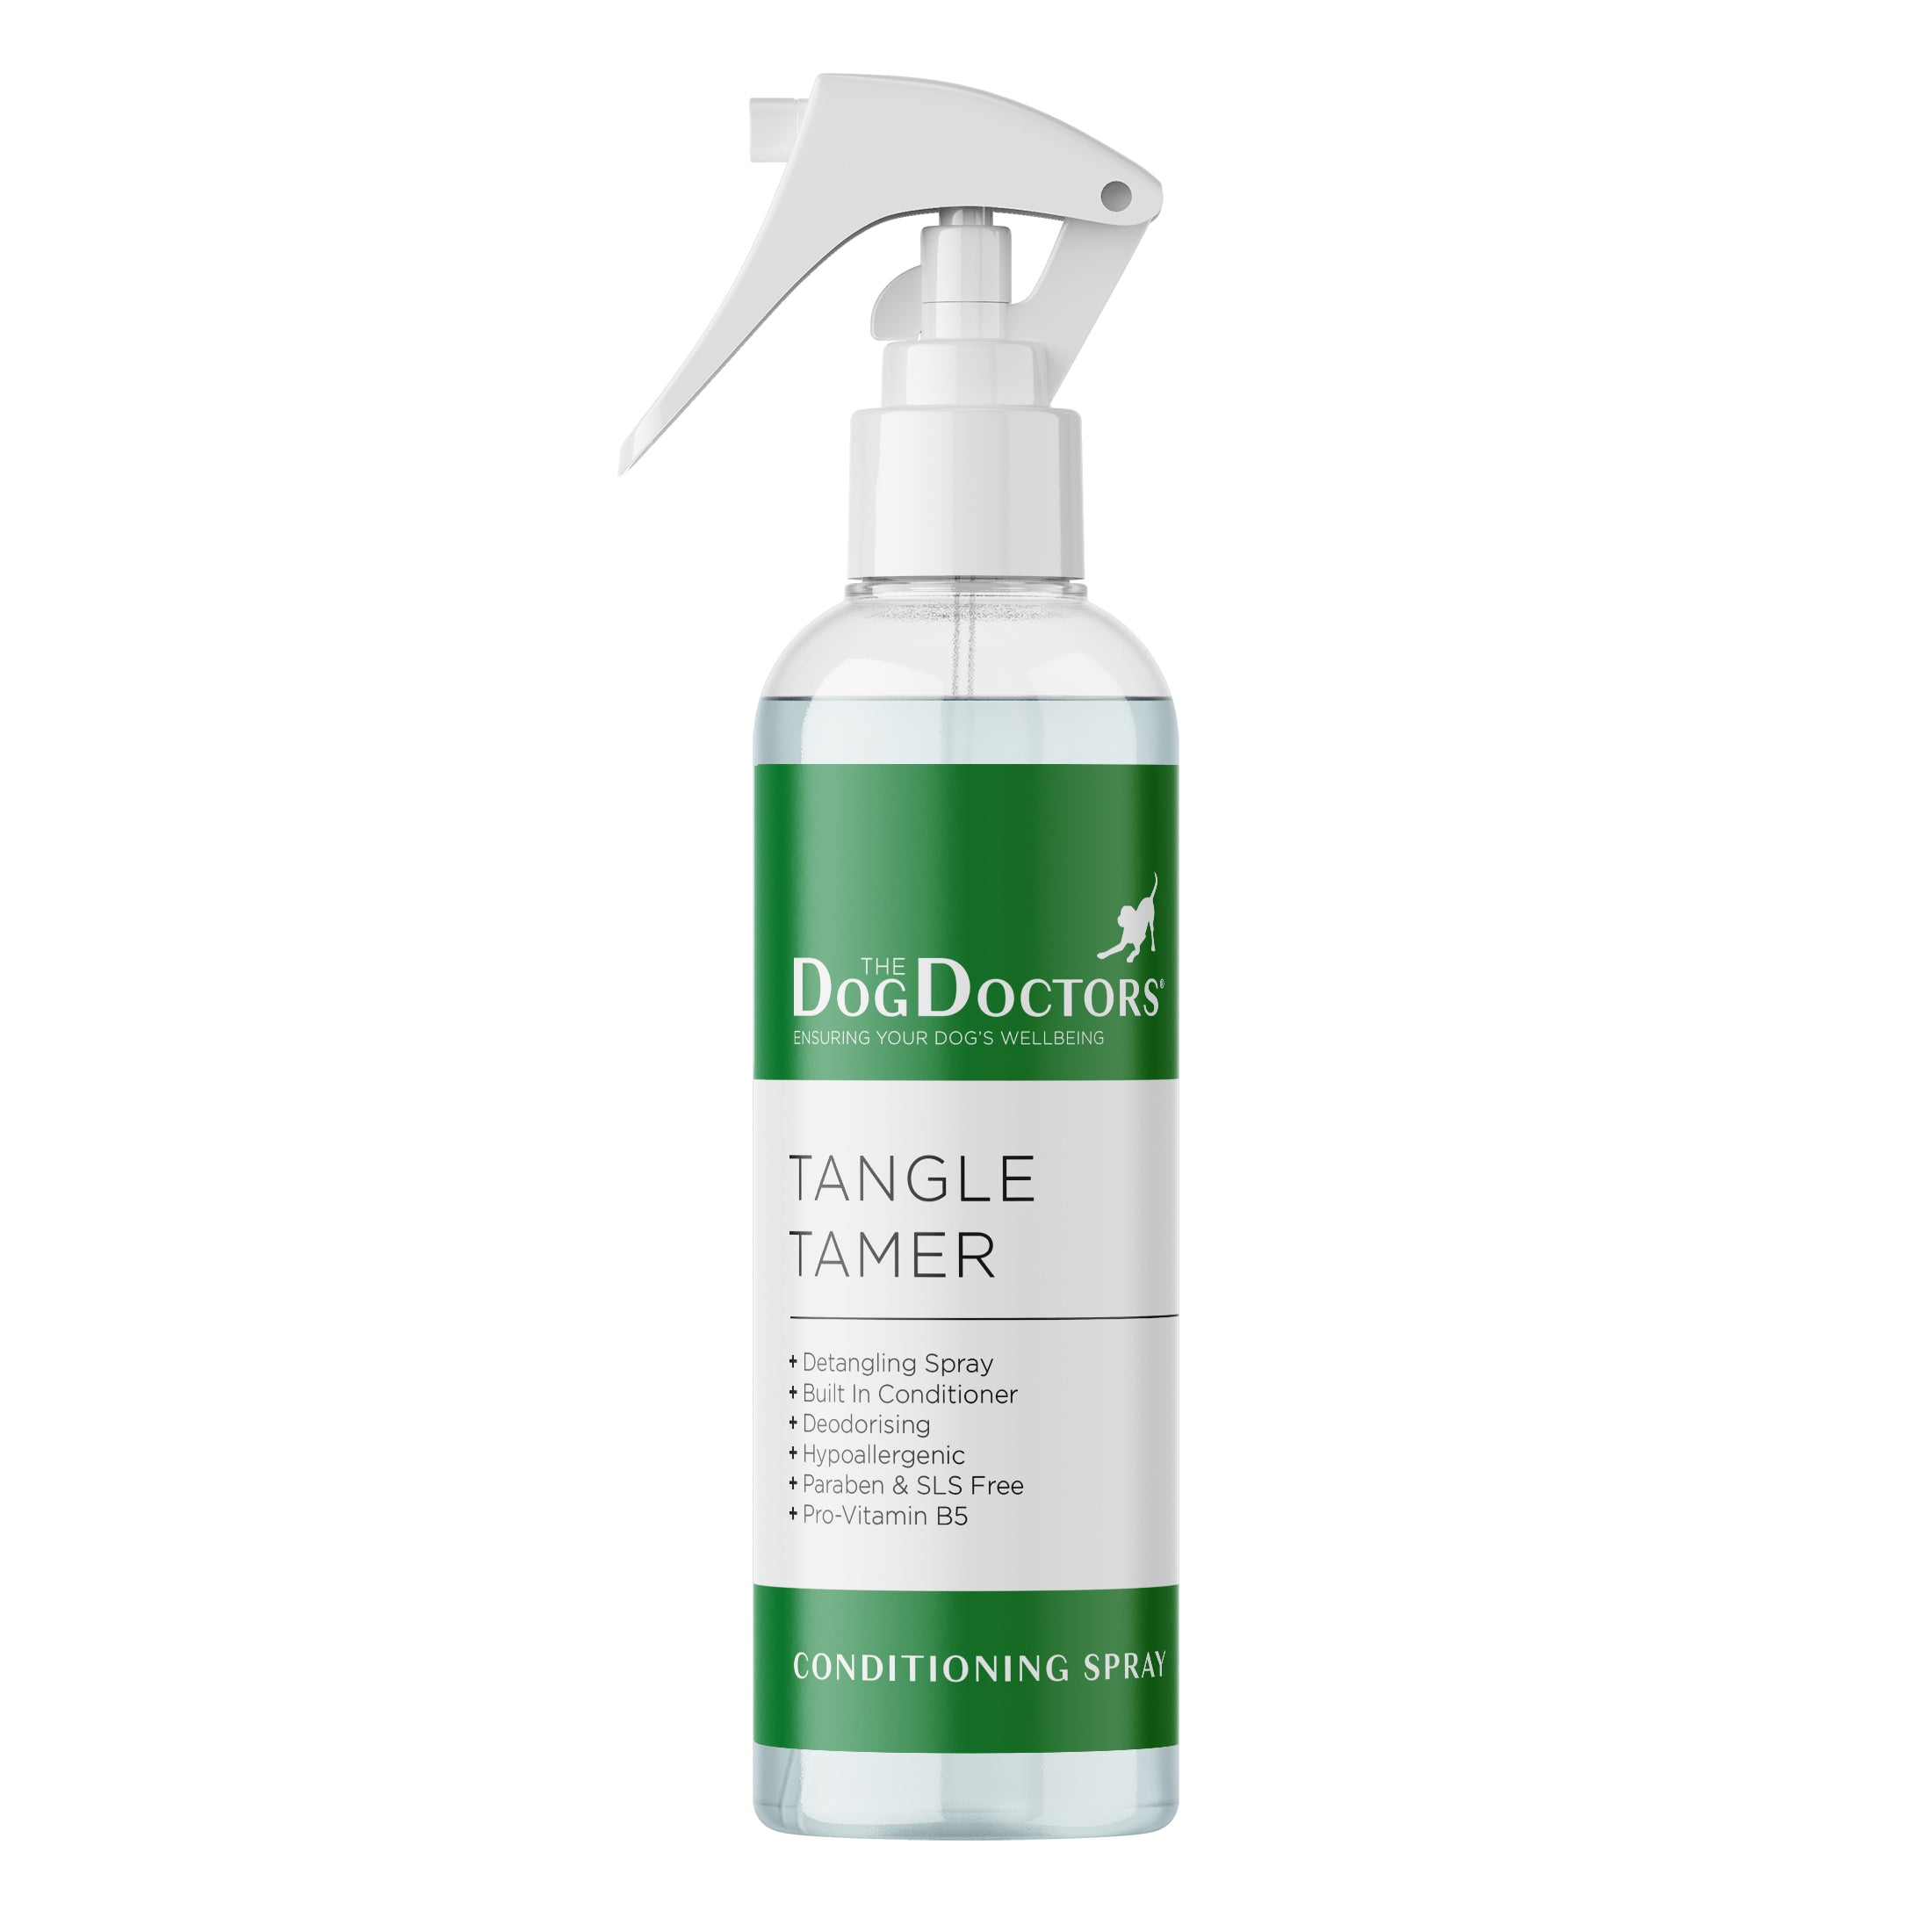 Image of Tangle Tamer - conditioning spray